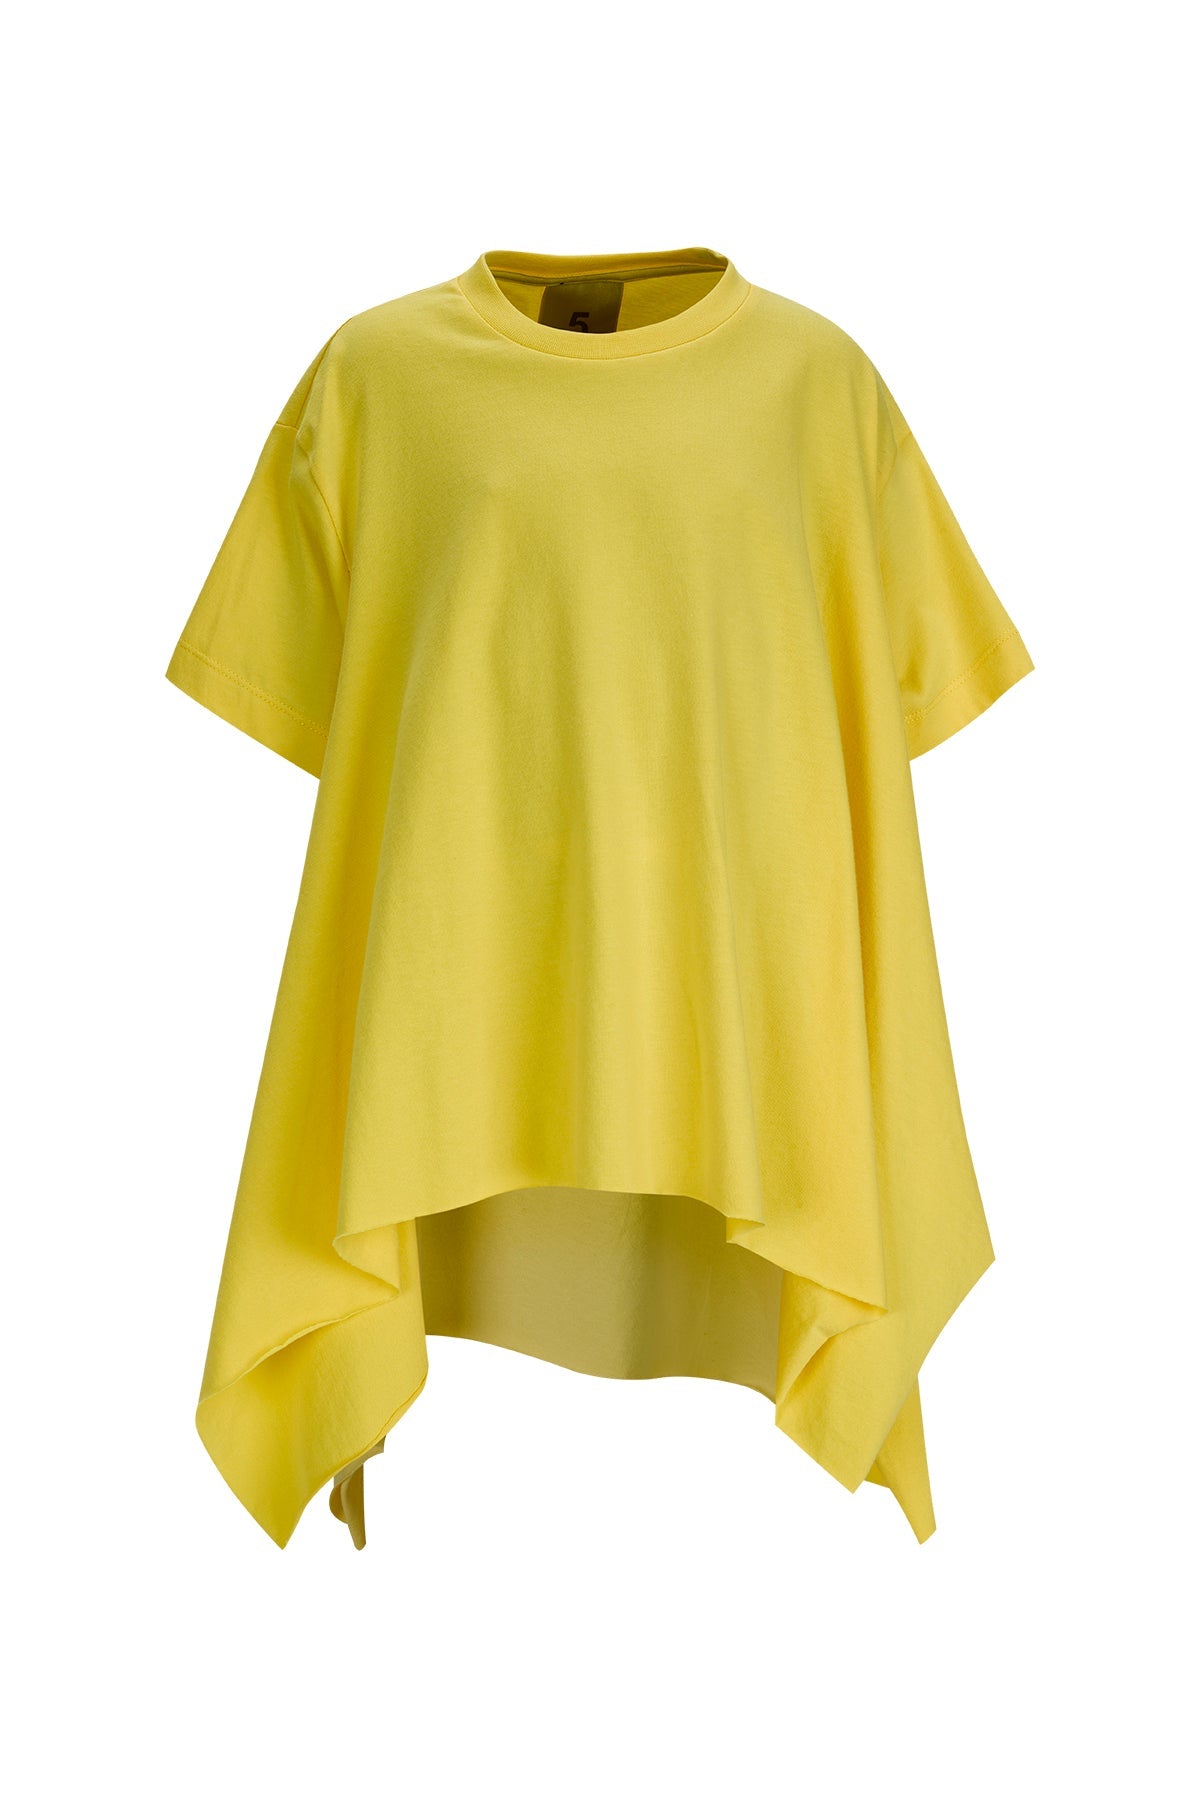 YELLOW T-SHIRT WITH SIDE FLAPS ma kids